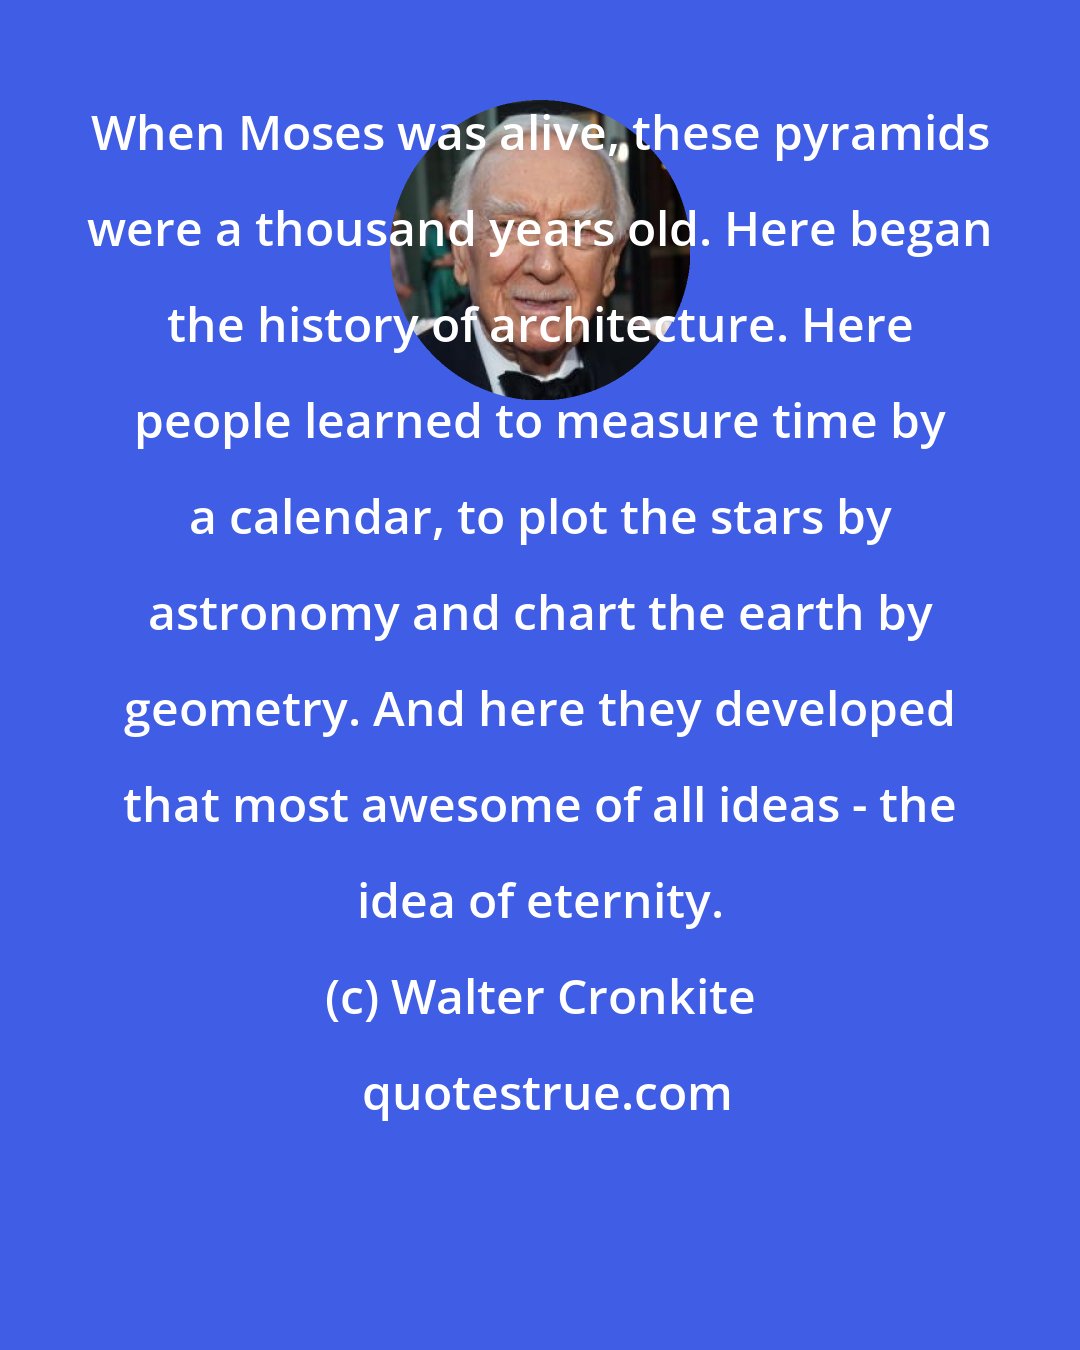 Walter Cronkite: When Moses was alive, these pyramids were a thousand years old. Here began the history of architecture. Here people learned to measure time by a calendar, to plot the stars by astronomy and chart the earth by geometry. And here they developed that most awesome of all ideas - the idea of eternity.